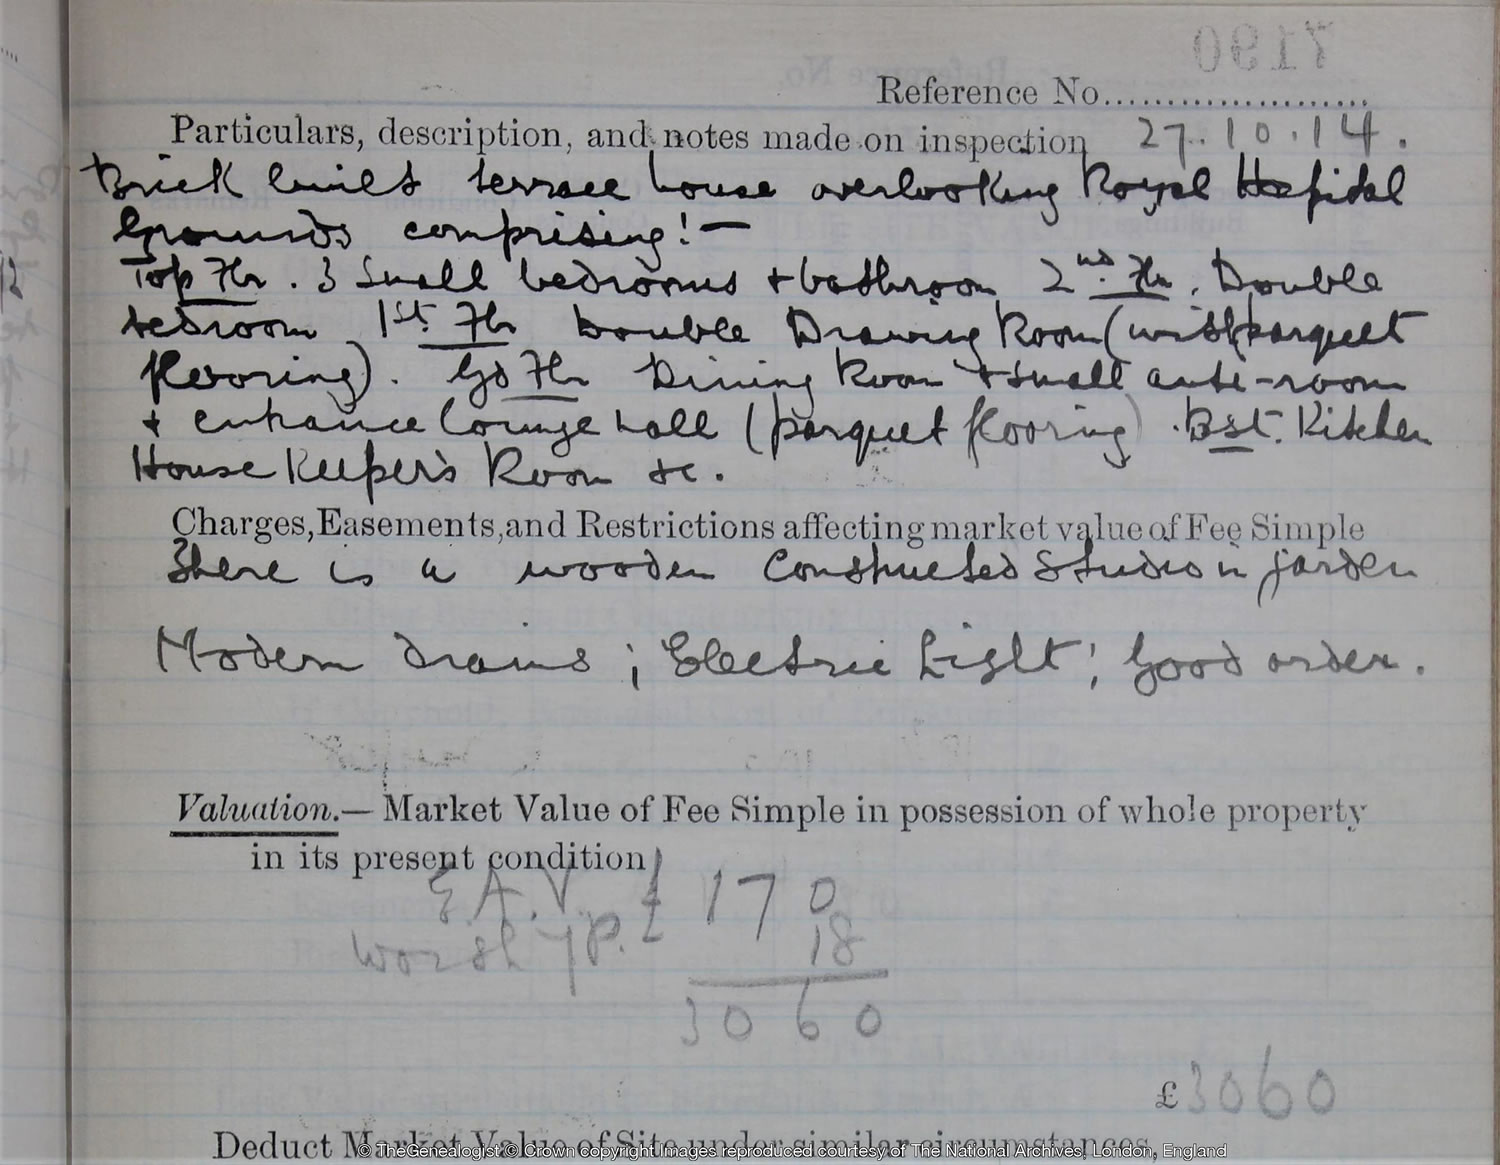 IR 58 Field book for Bram Stoker's home at 4 Durham Place